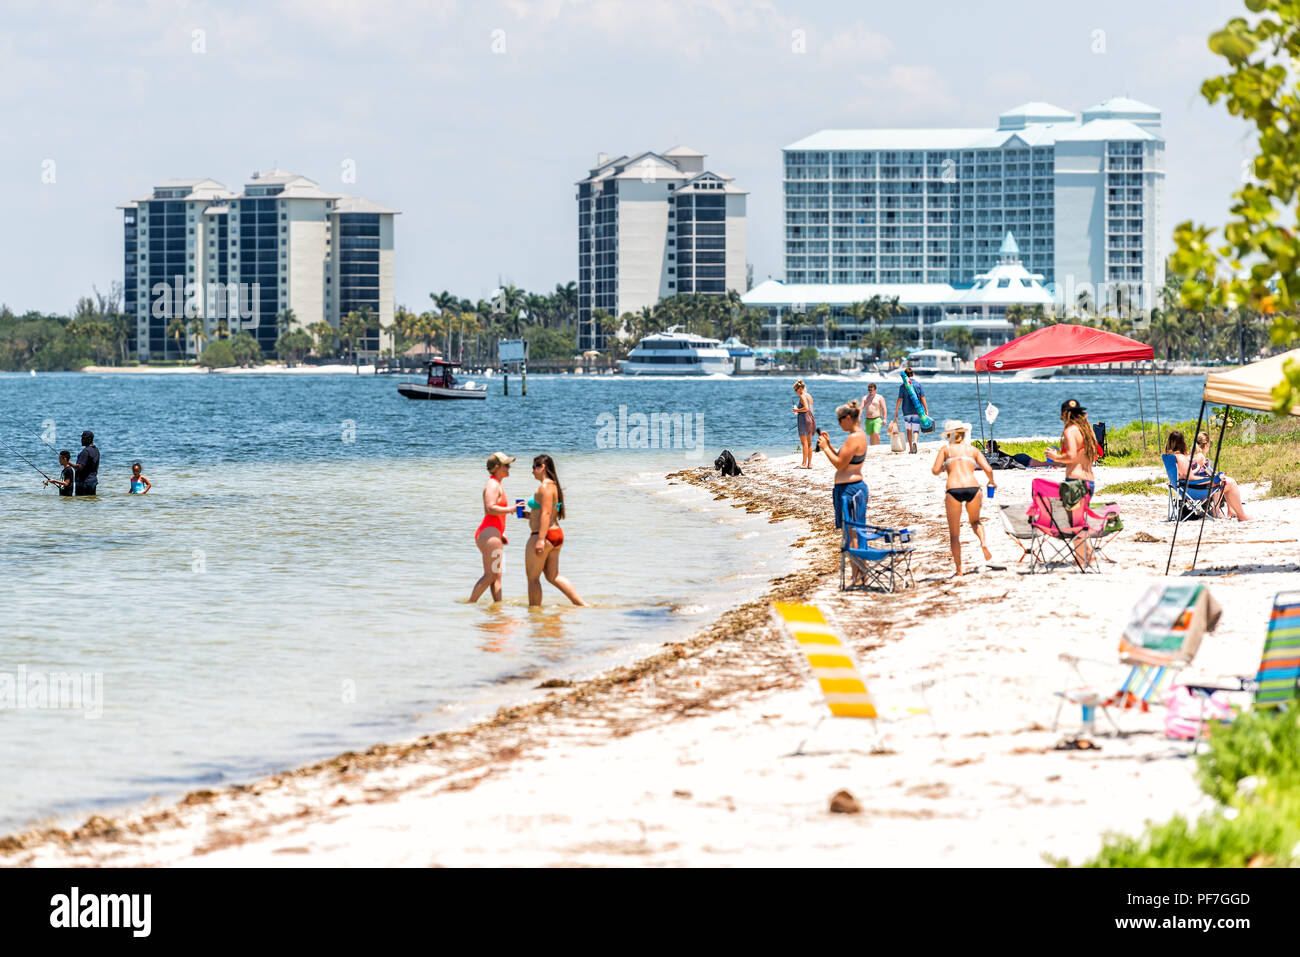 Sanibel Island, USA - April 29, 2018: Causeway beach with many people, tourists, crowd, crowded coast, coastline, chairs during sunny day Stock Photo